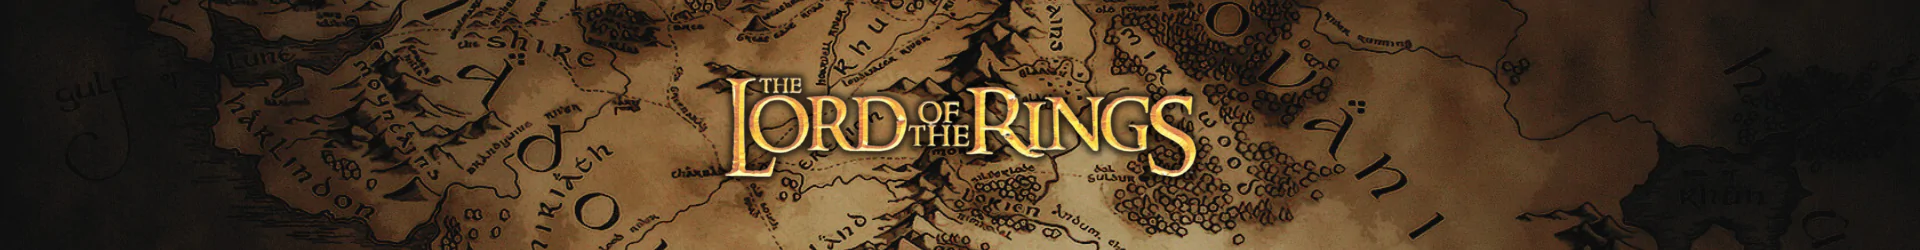 Lord of the Rings repliken banner